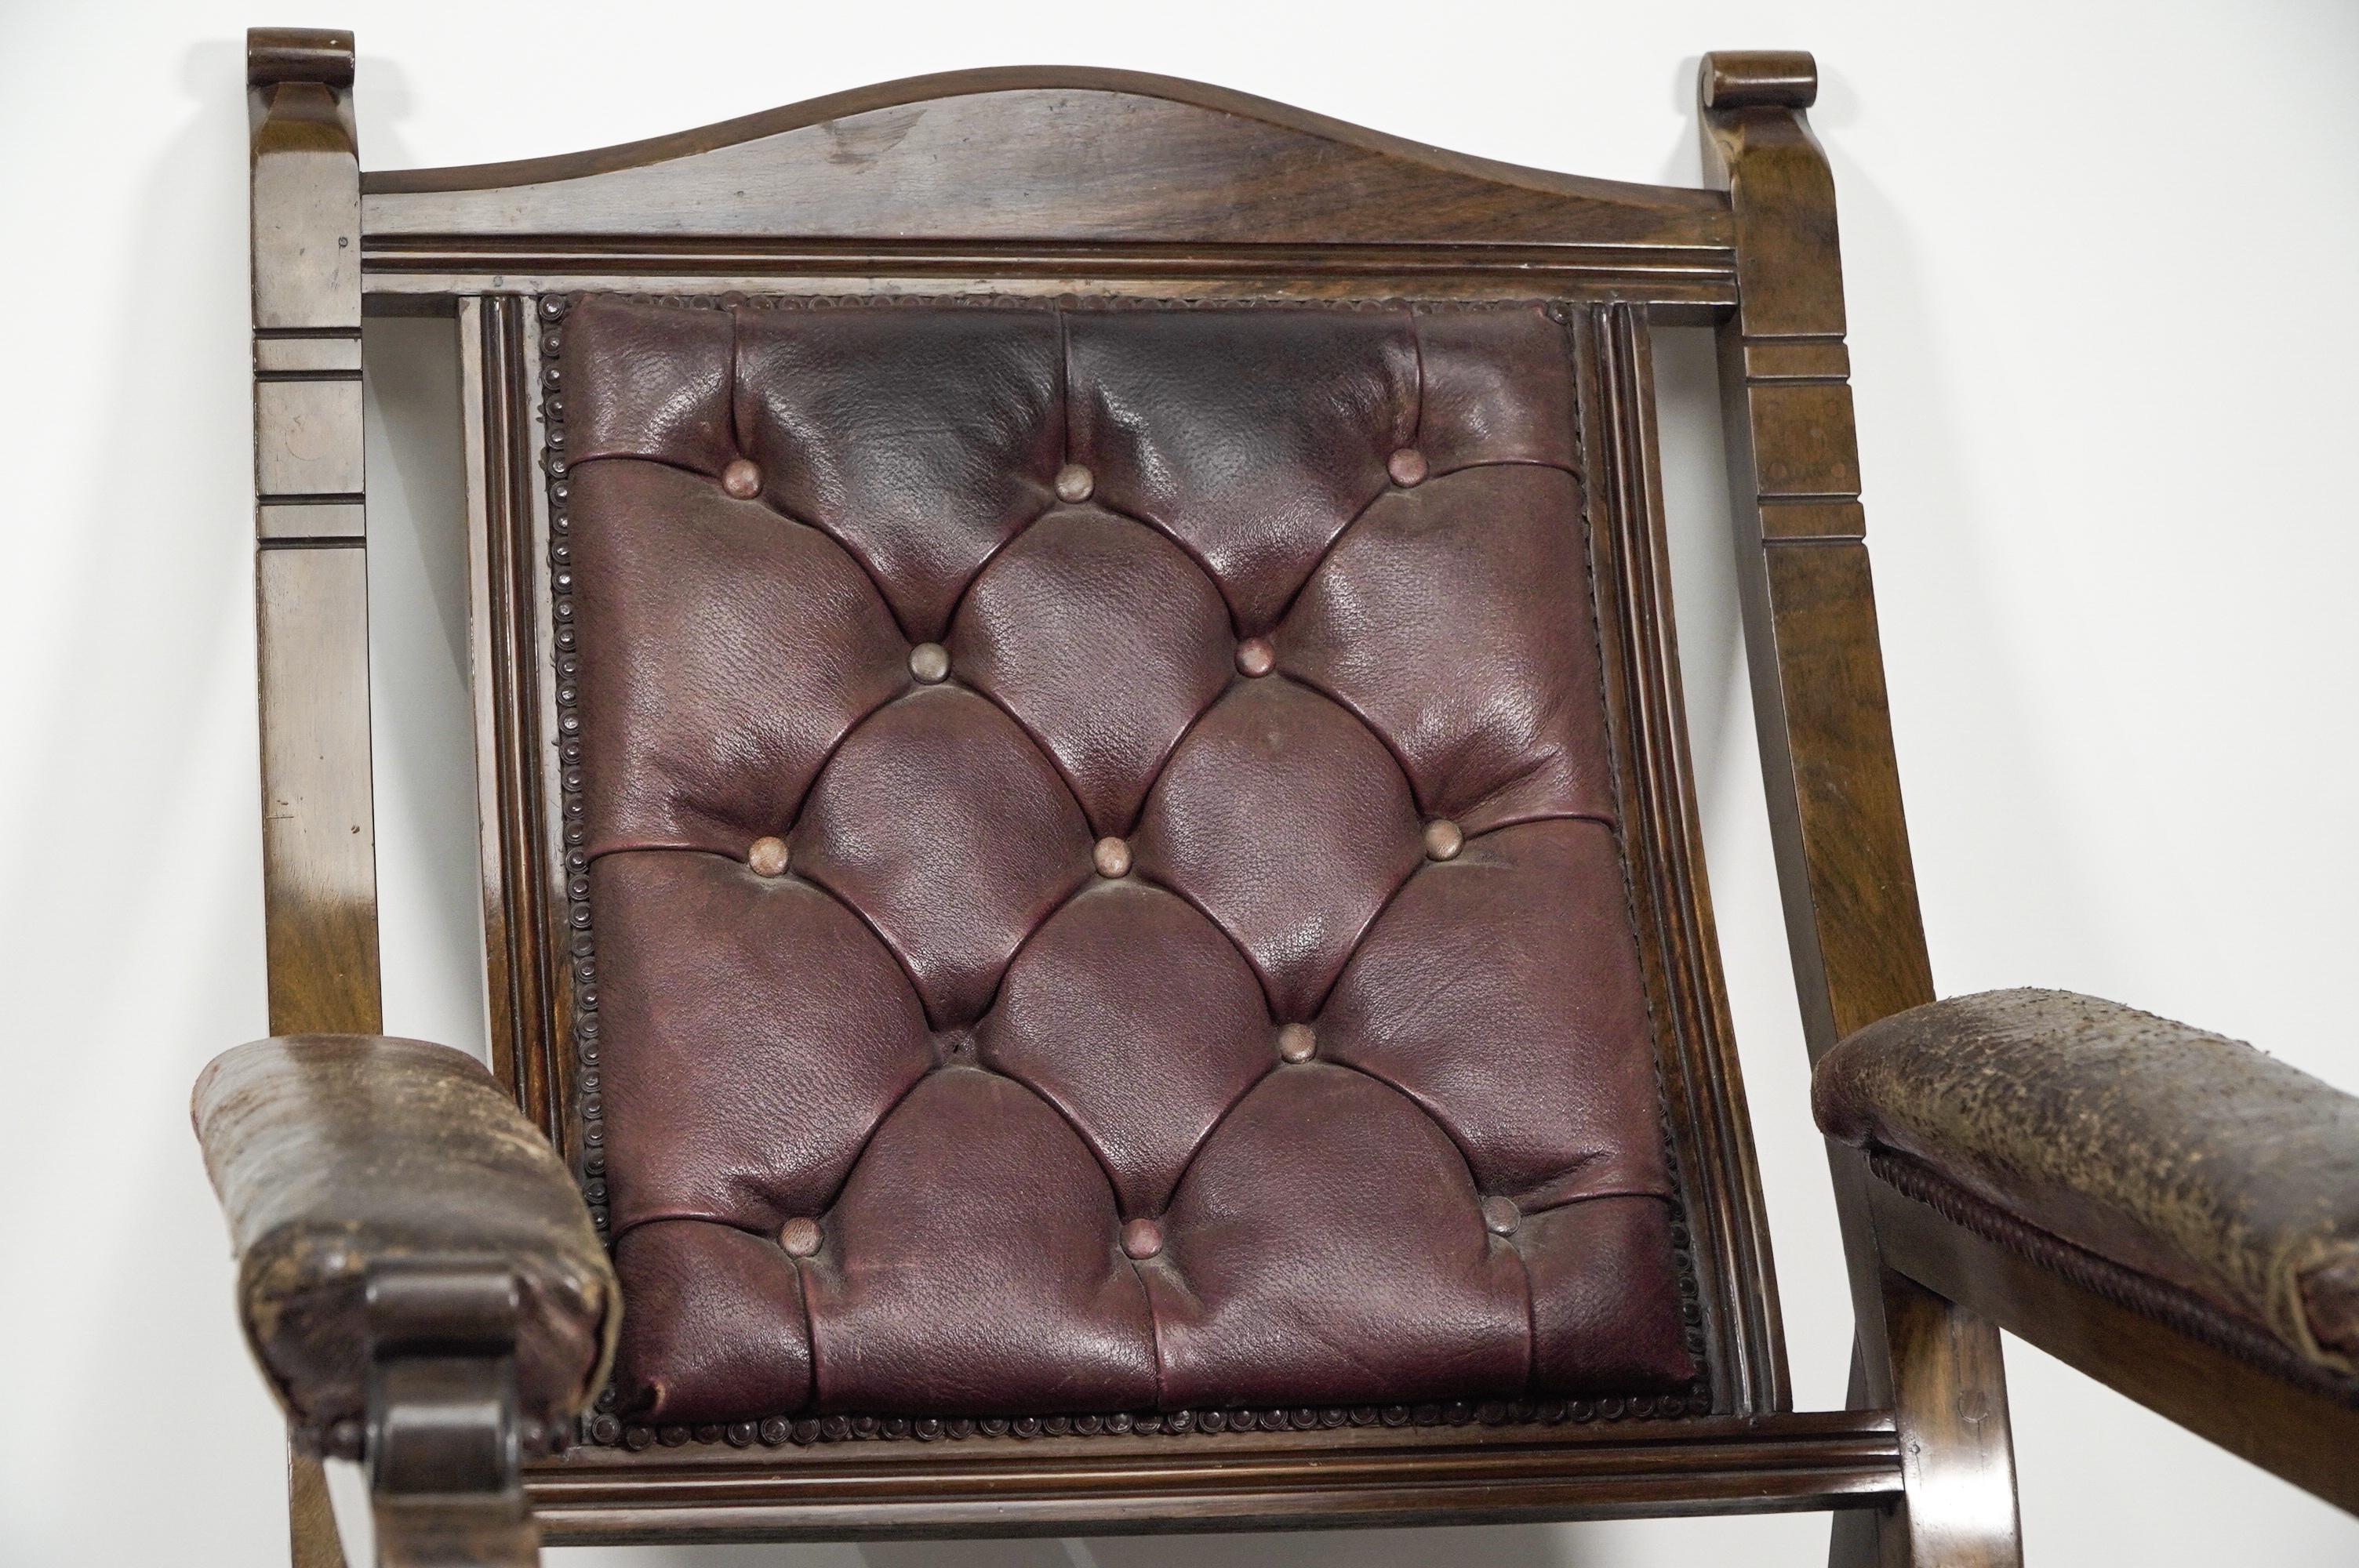 Late 19th Century An Aesthetic Movement walnut armchair with a curvaceous back leather upholstery. For Sale